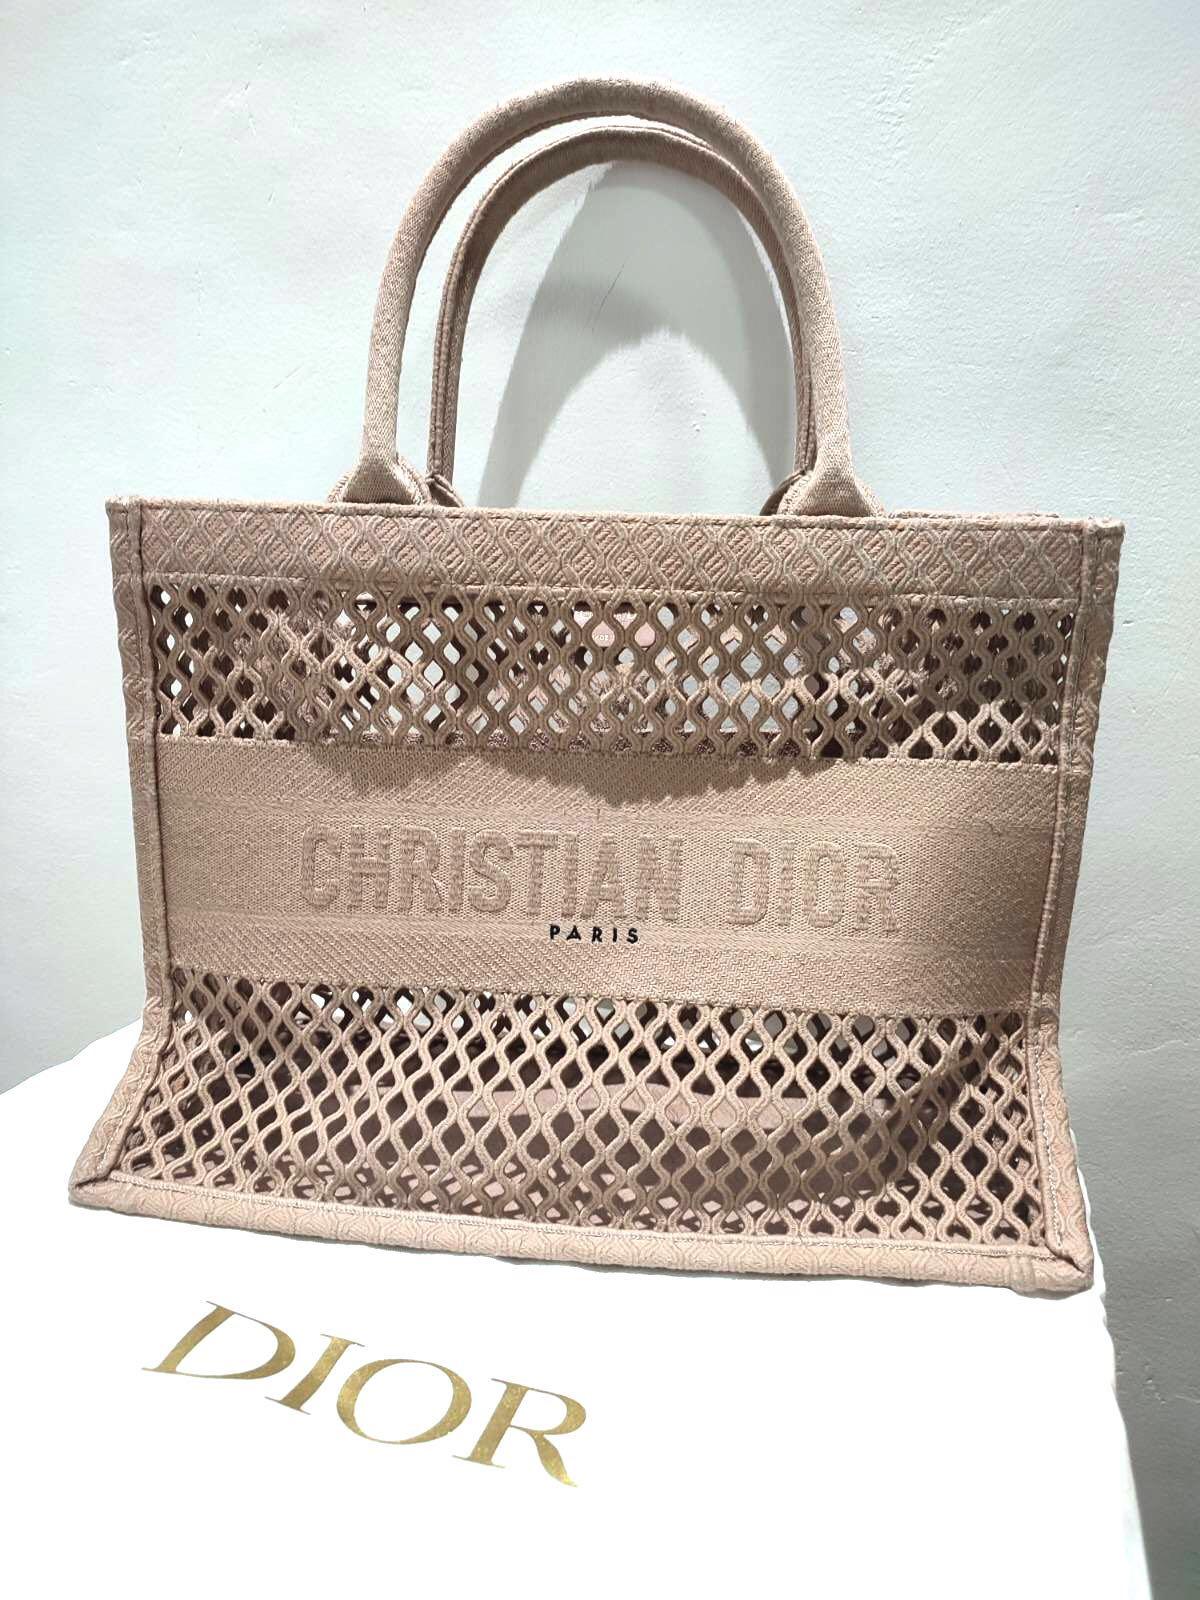 CHRISTIAN DIOR BOOK TOTE Blue Mesh Embroidery 